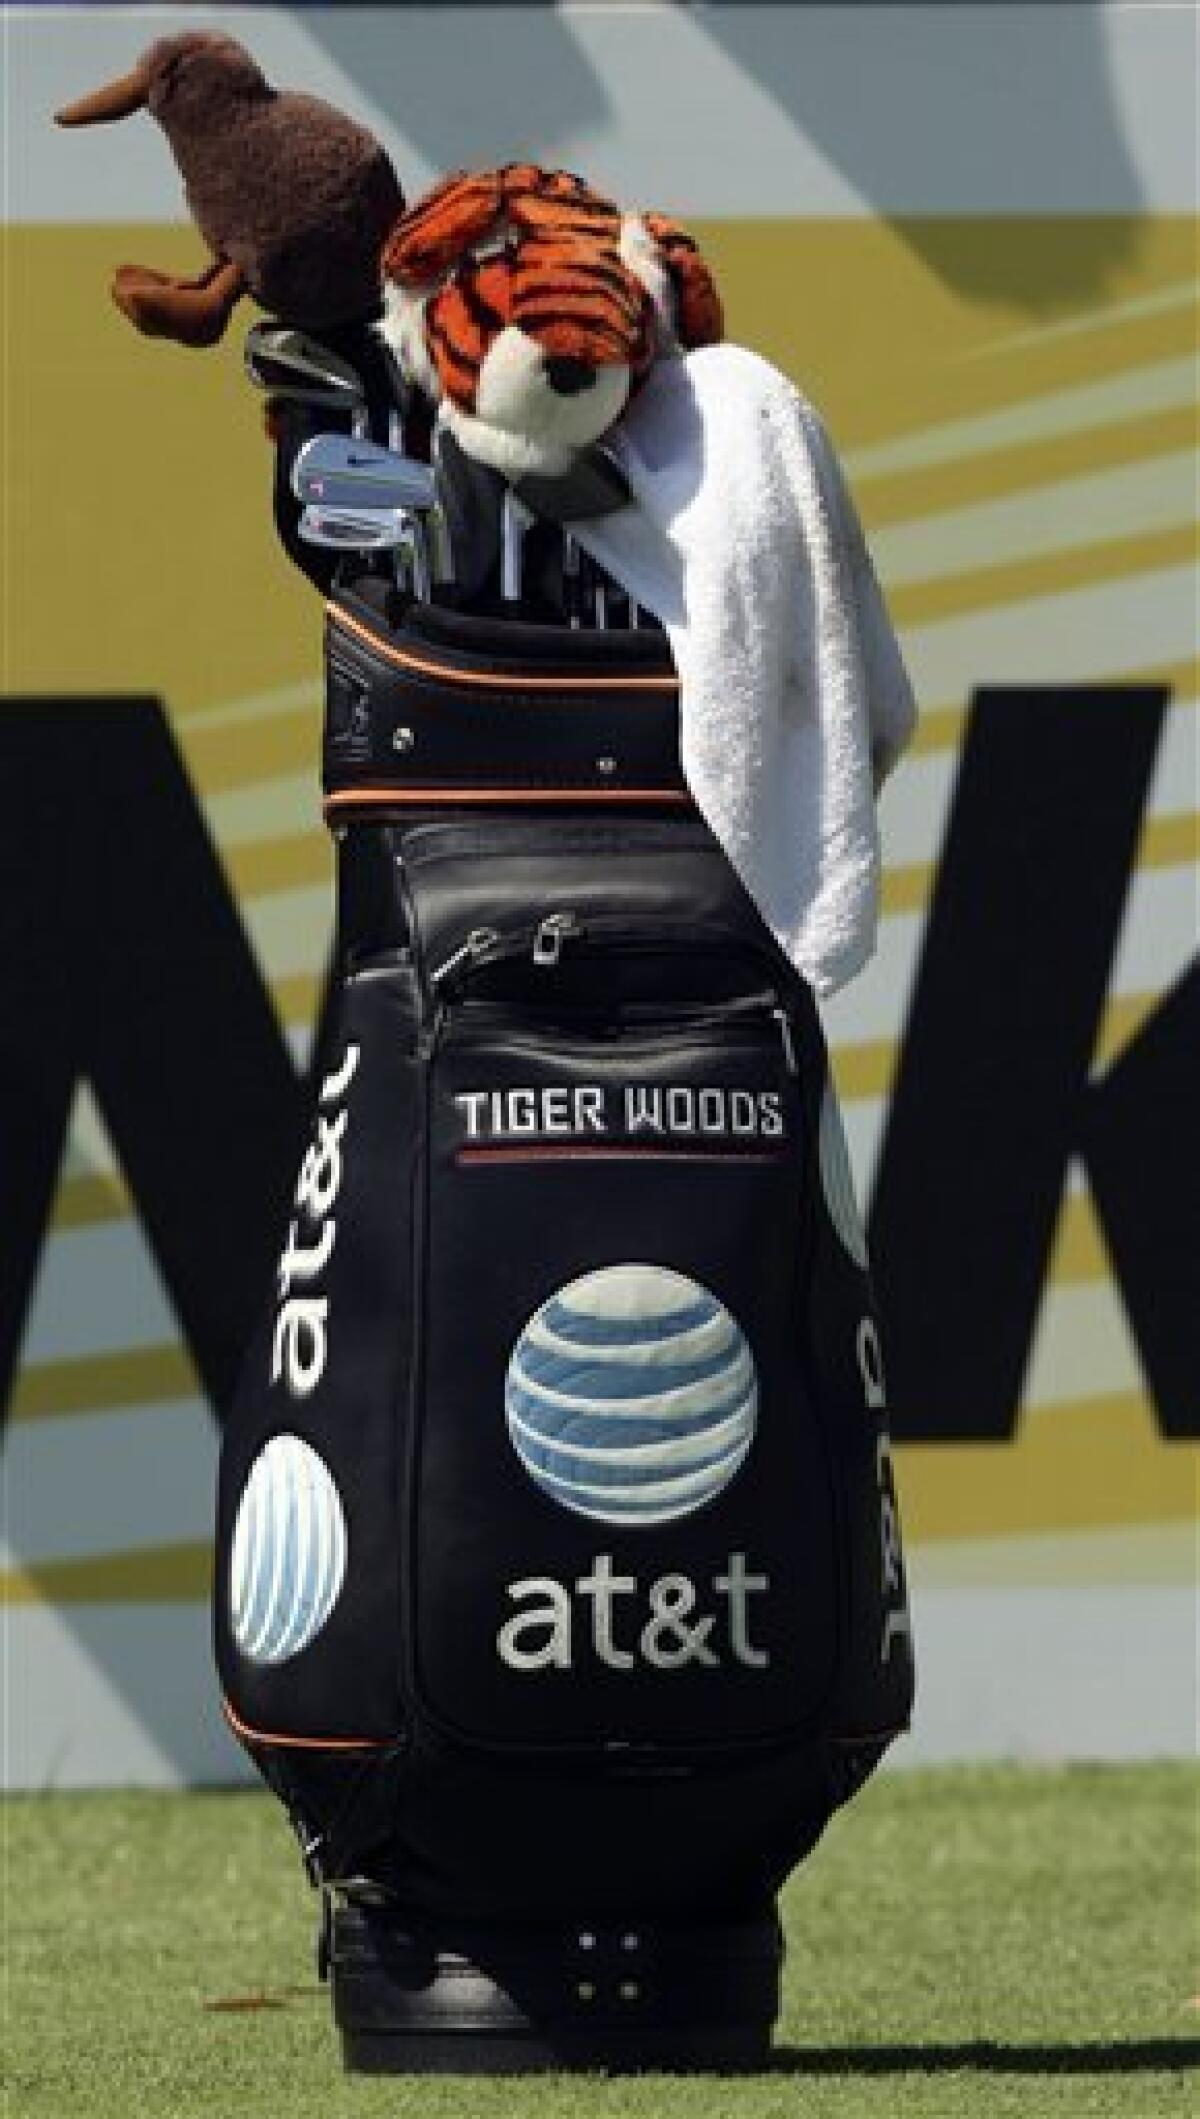 FILE - This Nov. 11, 2009, file photo shows Tiger Woods golf bag on the 18th tee during a Pro-Am match ahead of the Australian Masters golf tournament in Melbourne, Australia. A year has passed since the infamous crash that started it all, and Woods appears ready to re-enter the marketing game. (AP Photo/Rob Griffith, File)